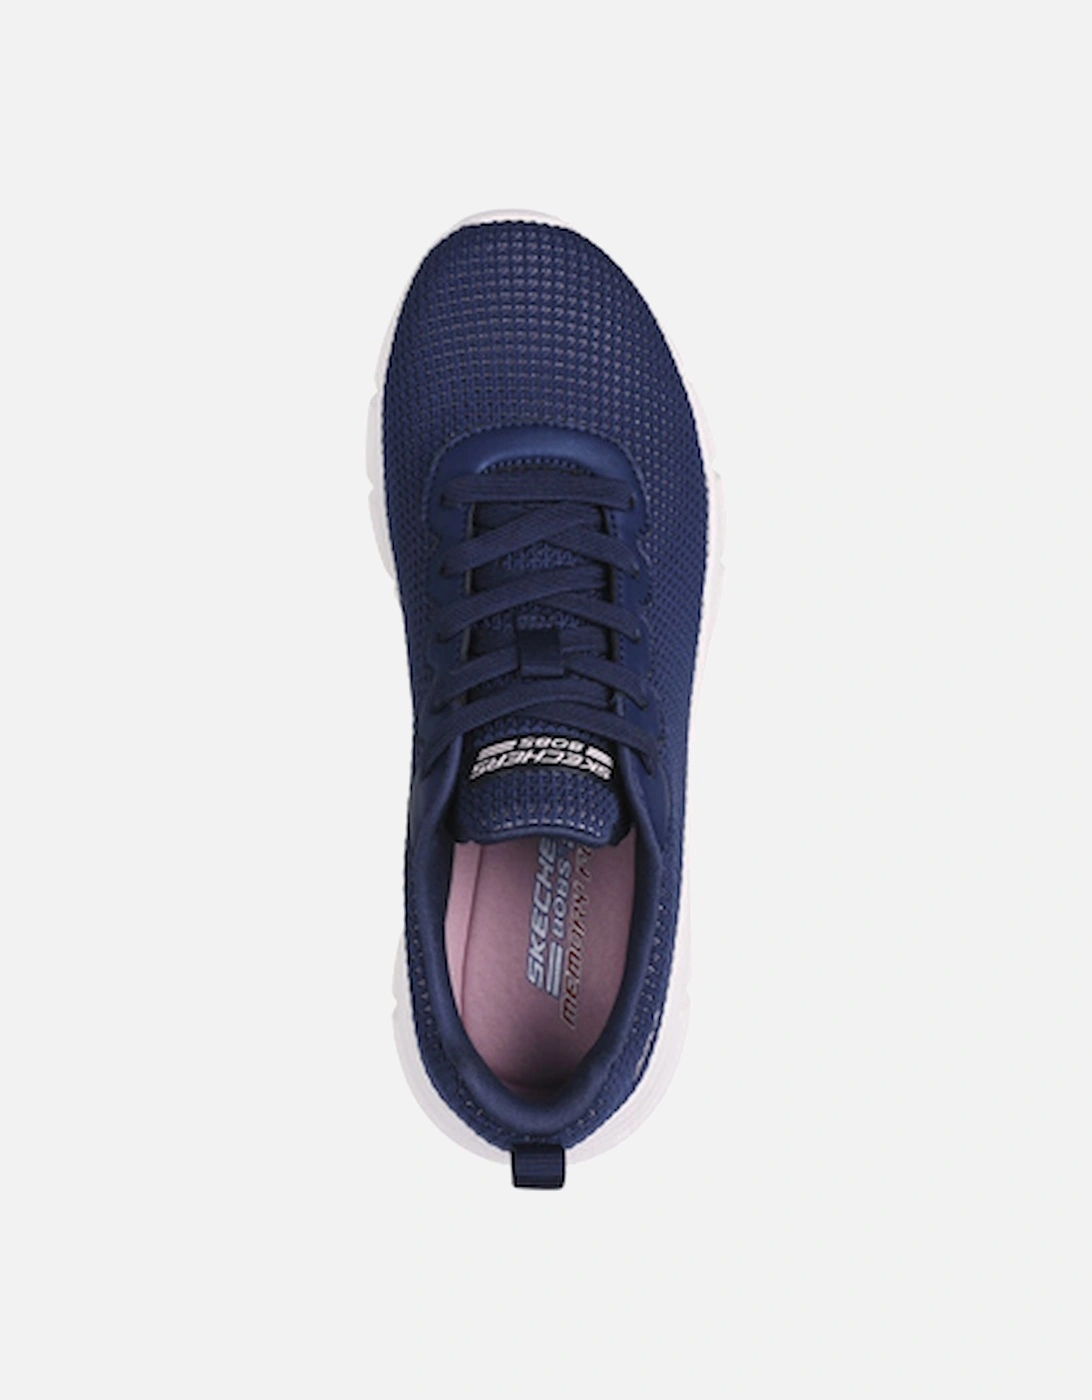 Women's Bobs B Flex Visionary Essence Lace Up Sneaker Navy